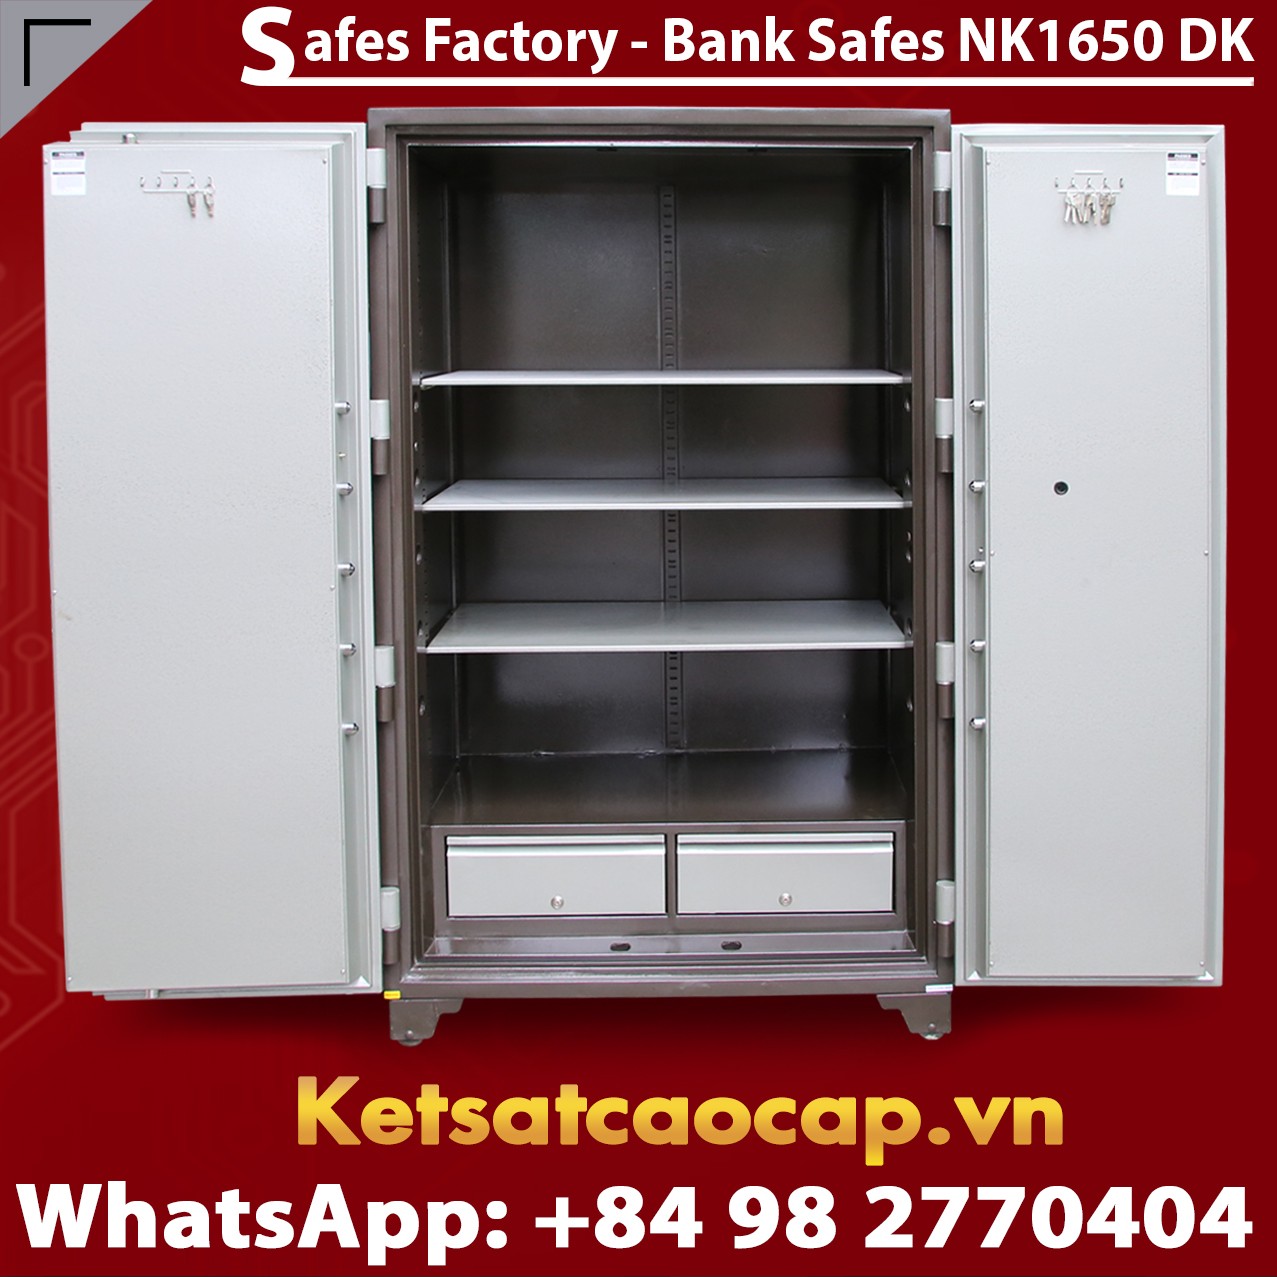 Bank Safes - Manufacturers & Suppliers In Vietnam